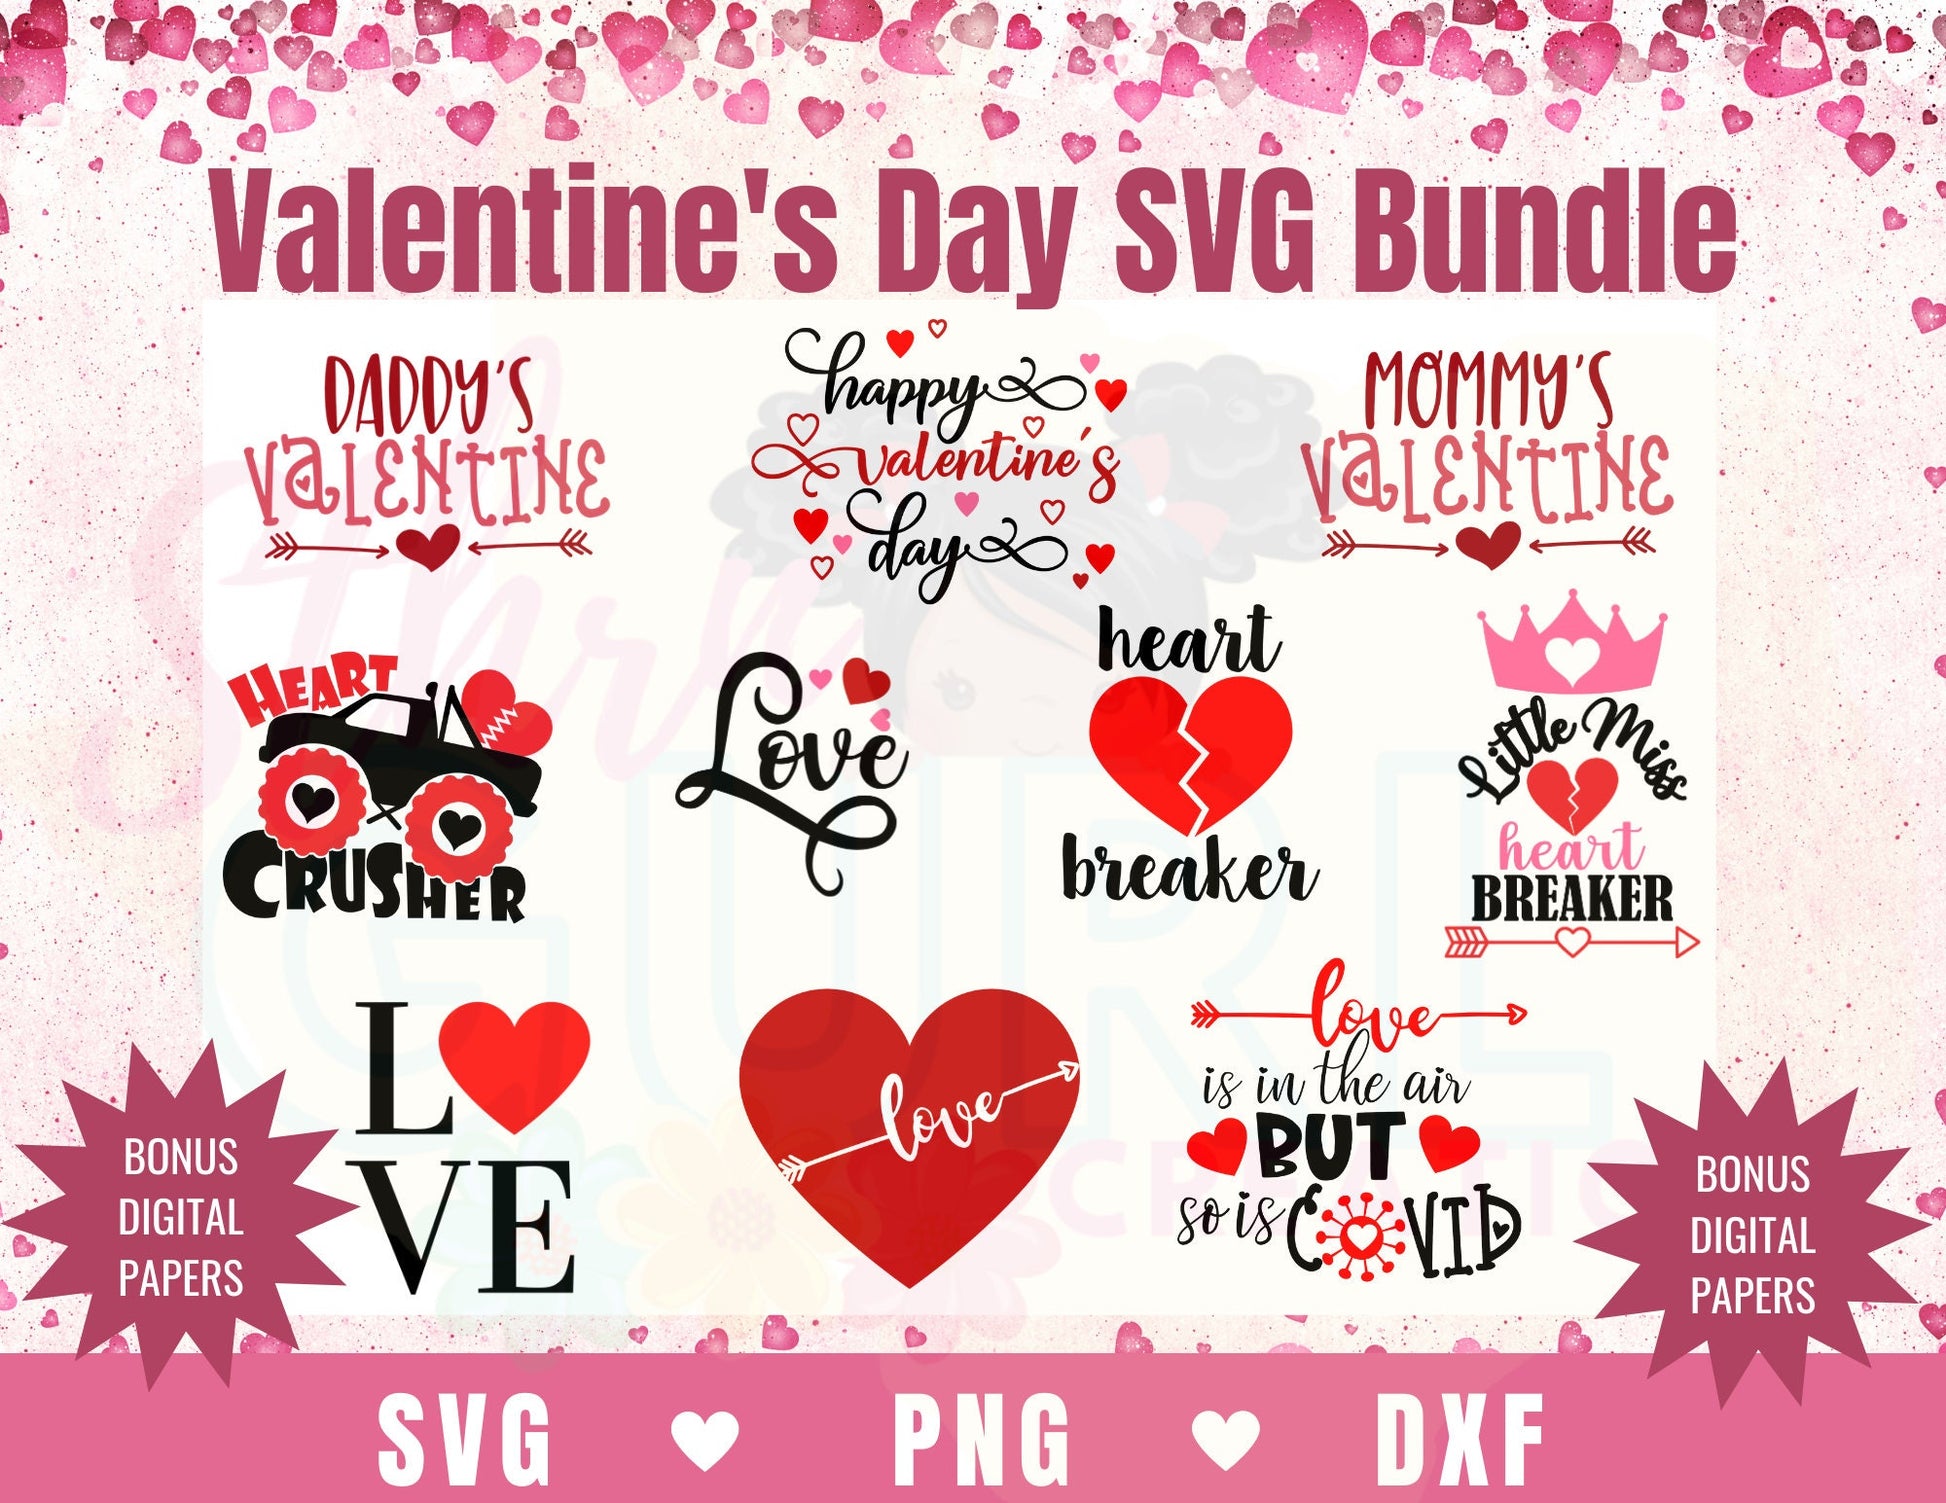 Valentines Svg Bundle, Valentines Svg, Valentine's SVG, Valentines Cut Files, Valentine's Day Svg, Love Svg, Dxf, Png - SthrngurlCreations